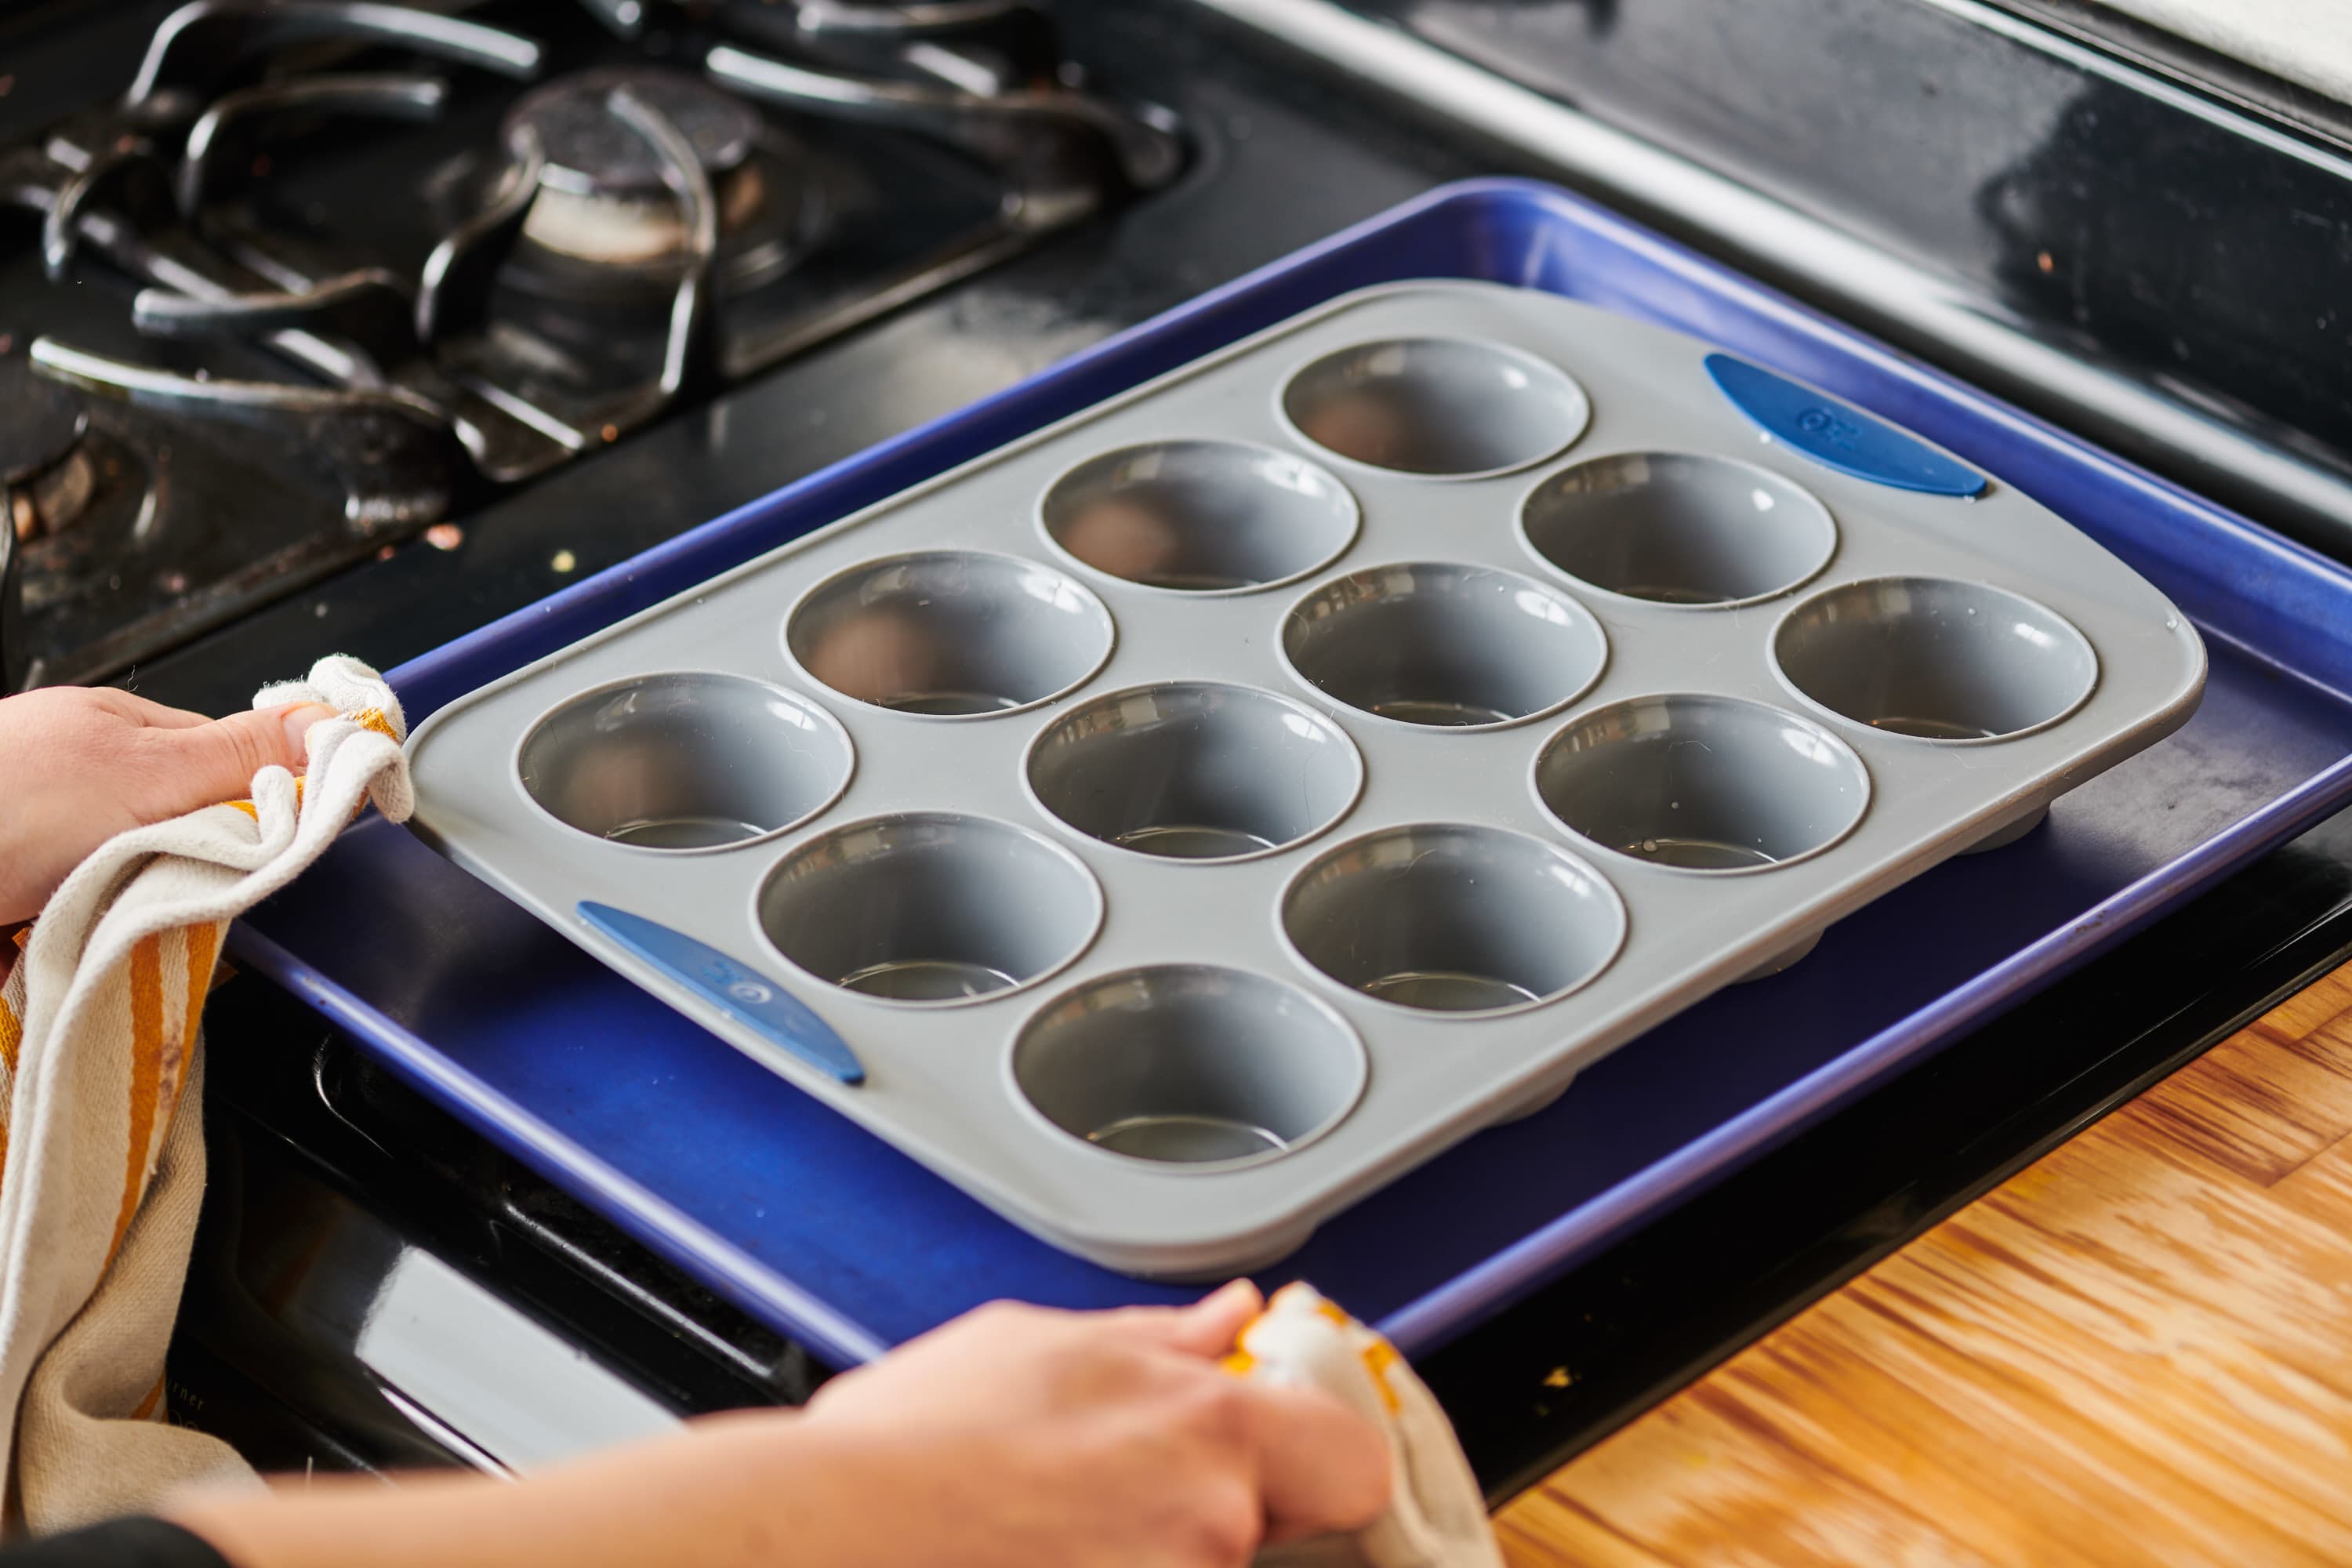 Why do my silicone baking molds smell funny? How to freshen up the stink